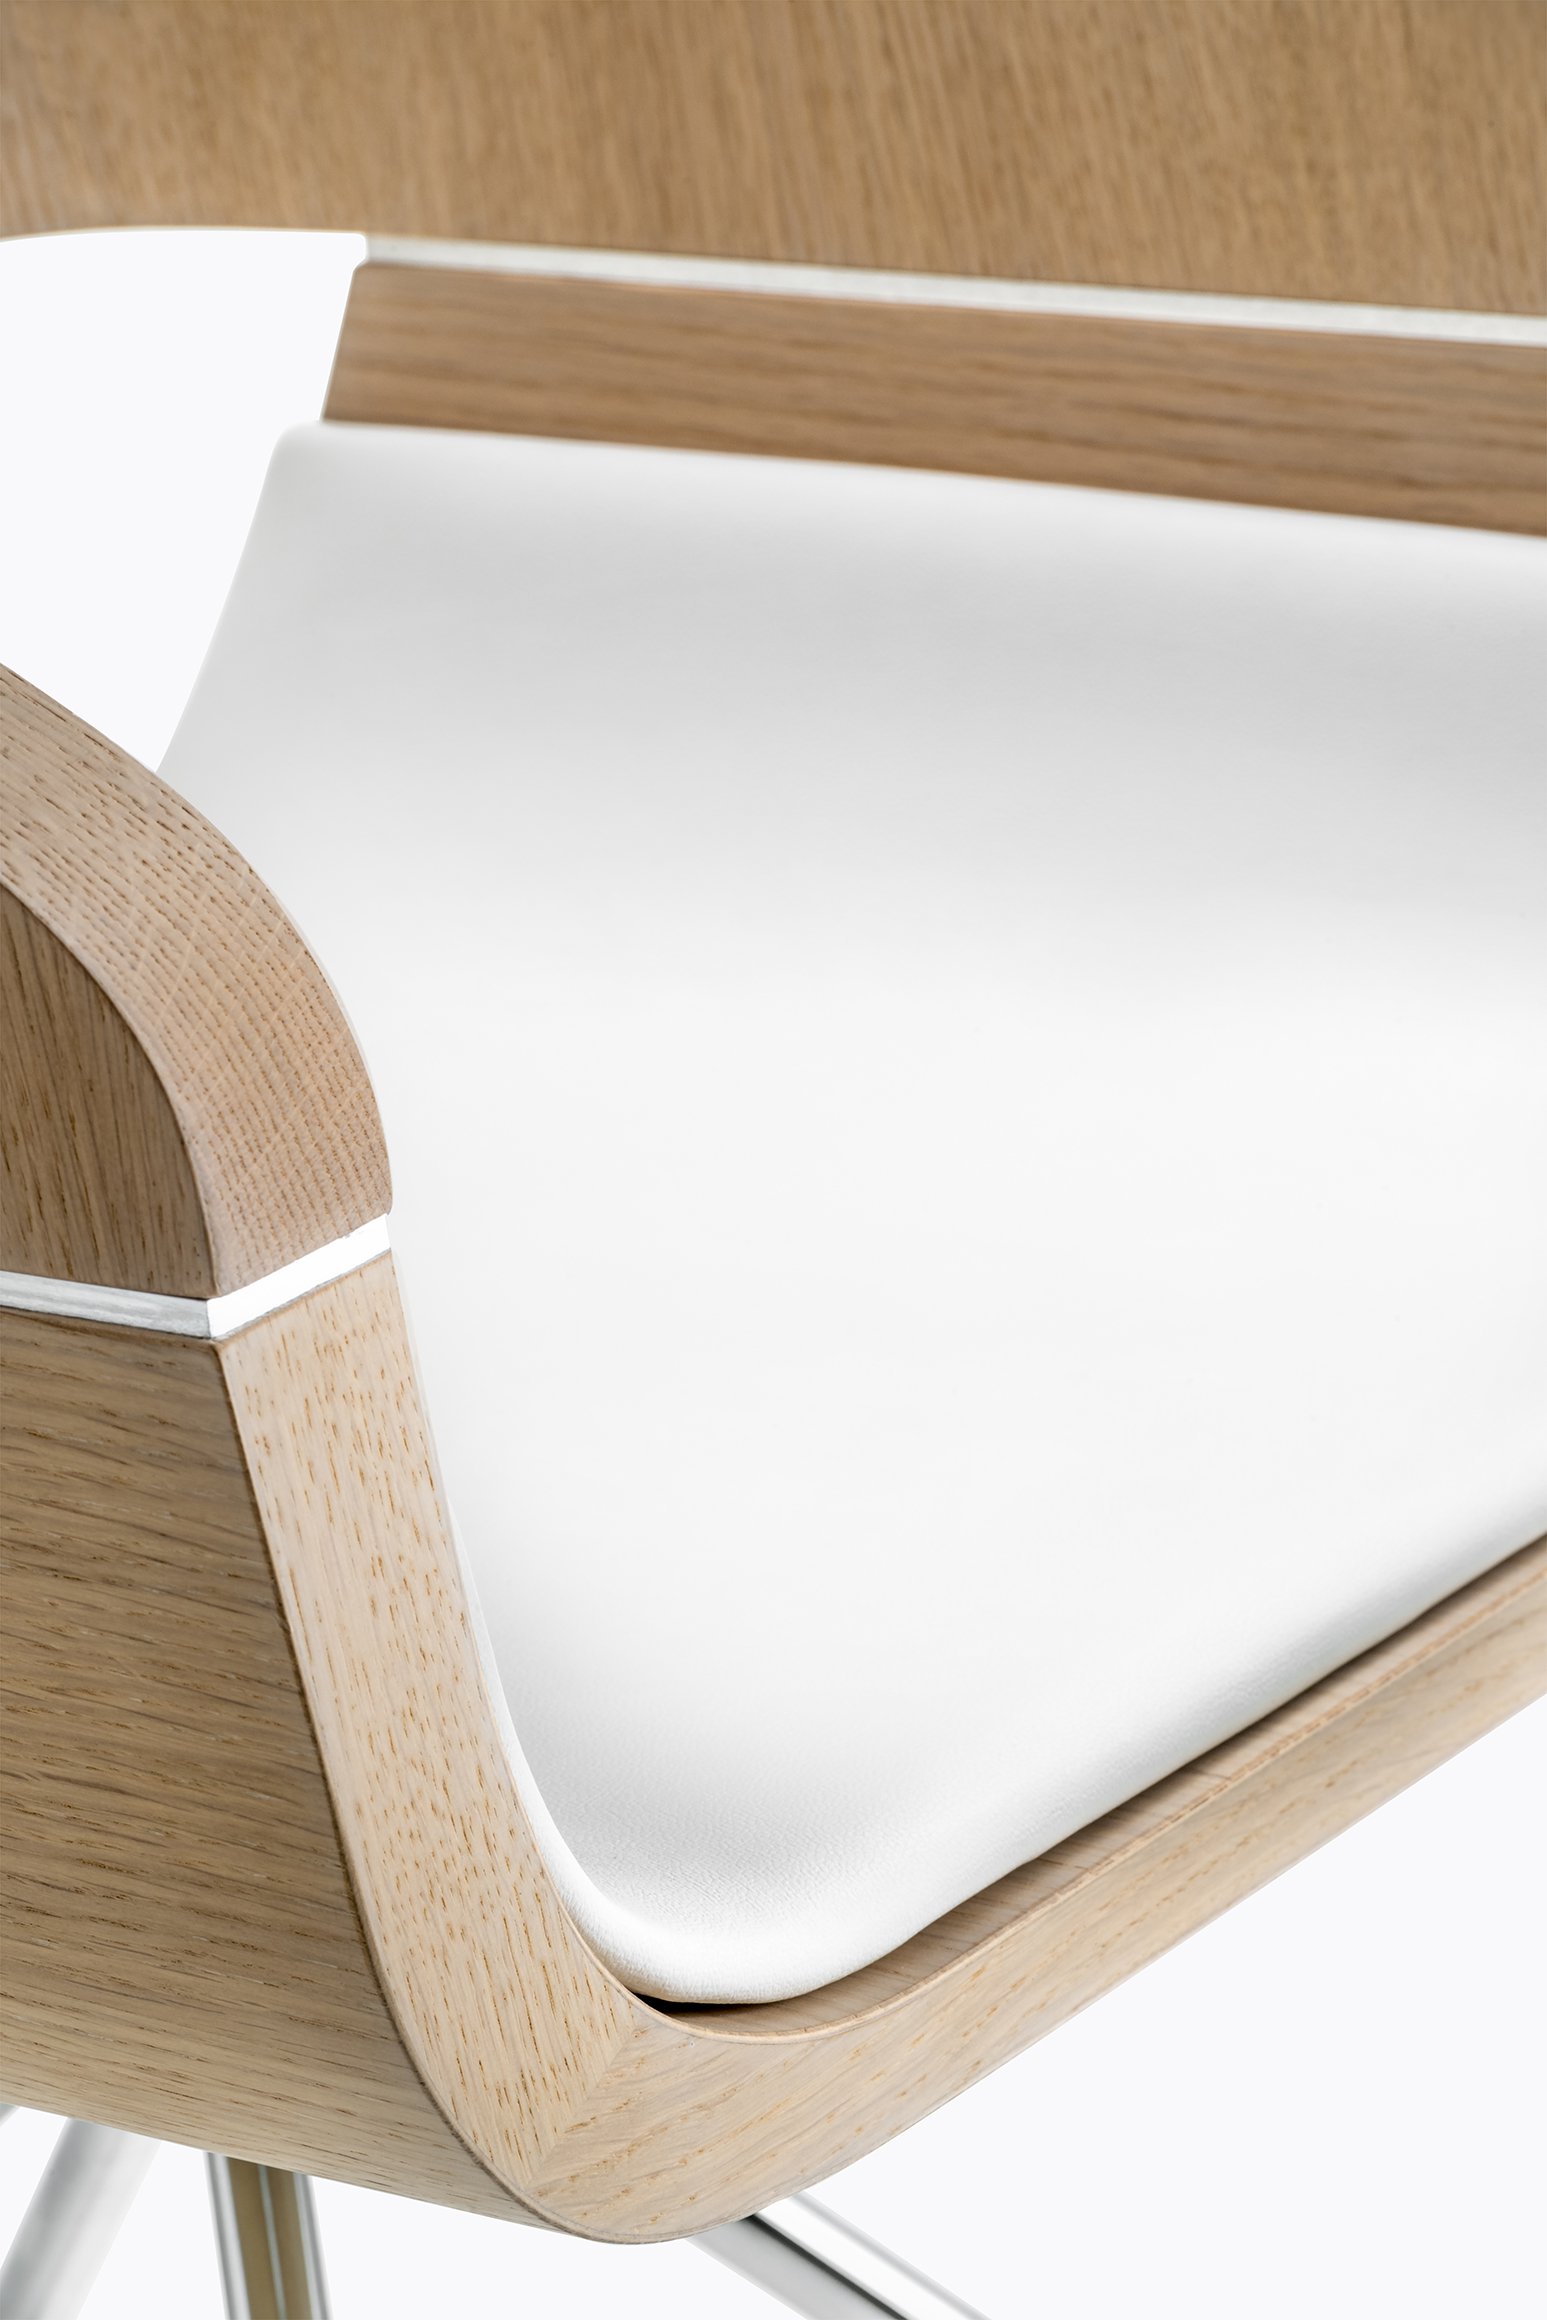 Apple 762 chair from Pedrali